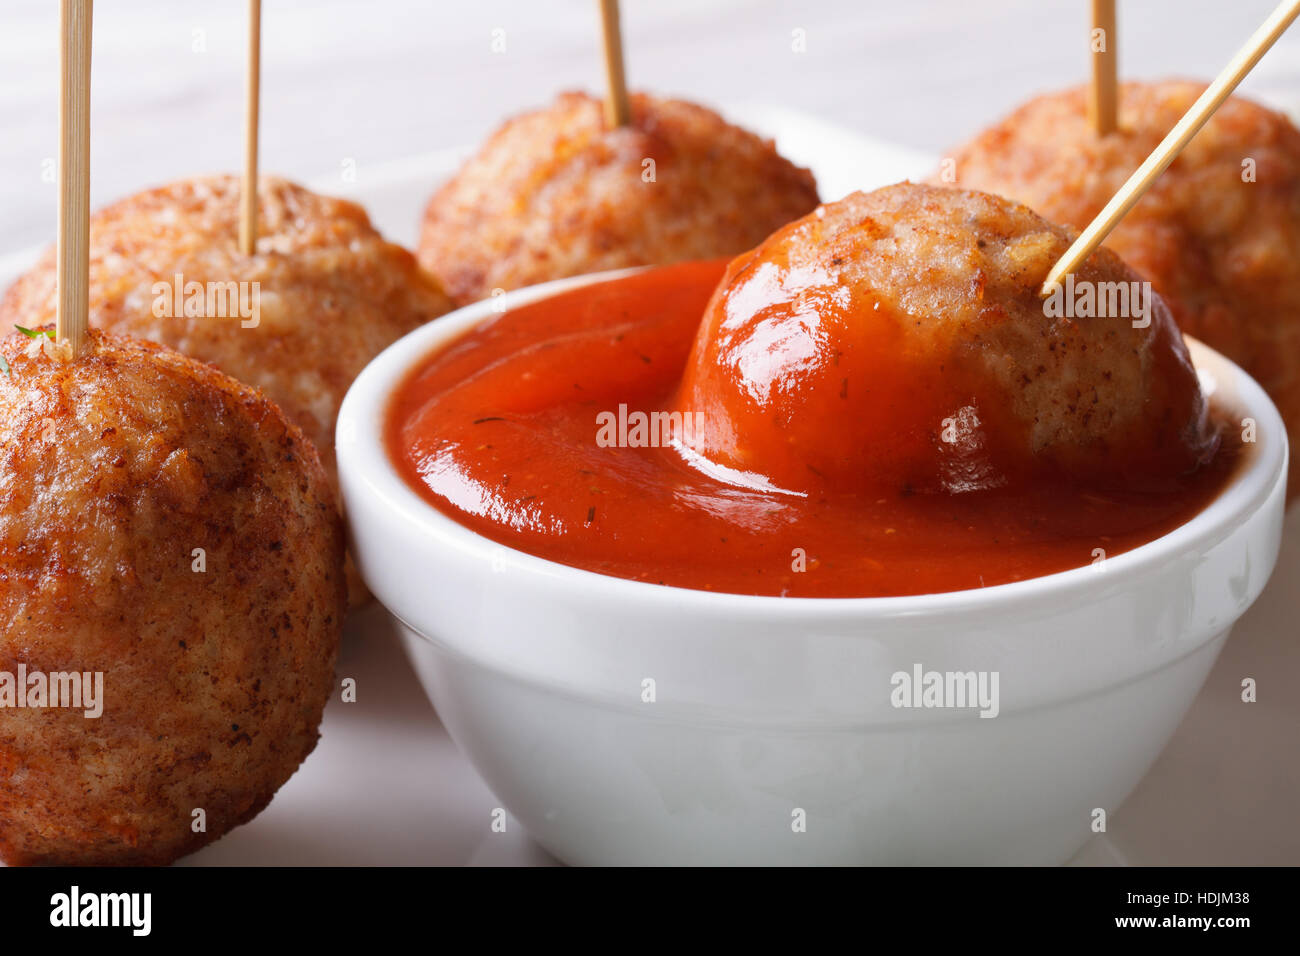 Roasted meatballs on skewers with ketchup closeup, horizontal Stock Photo